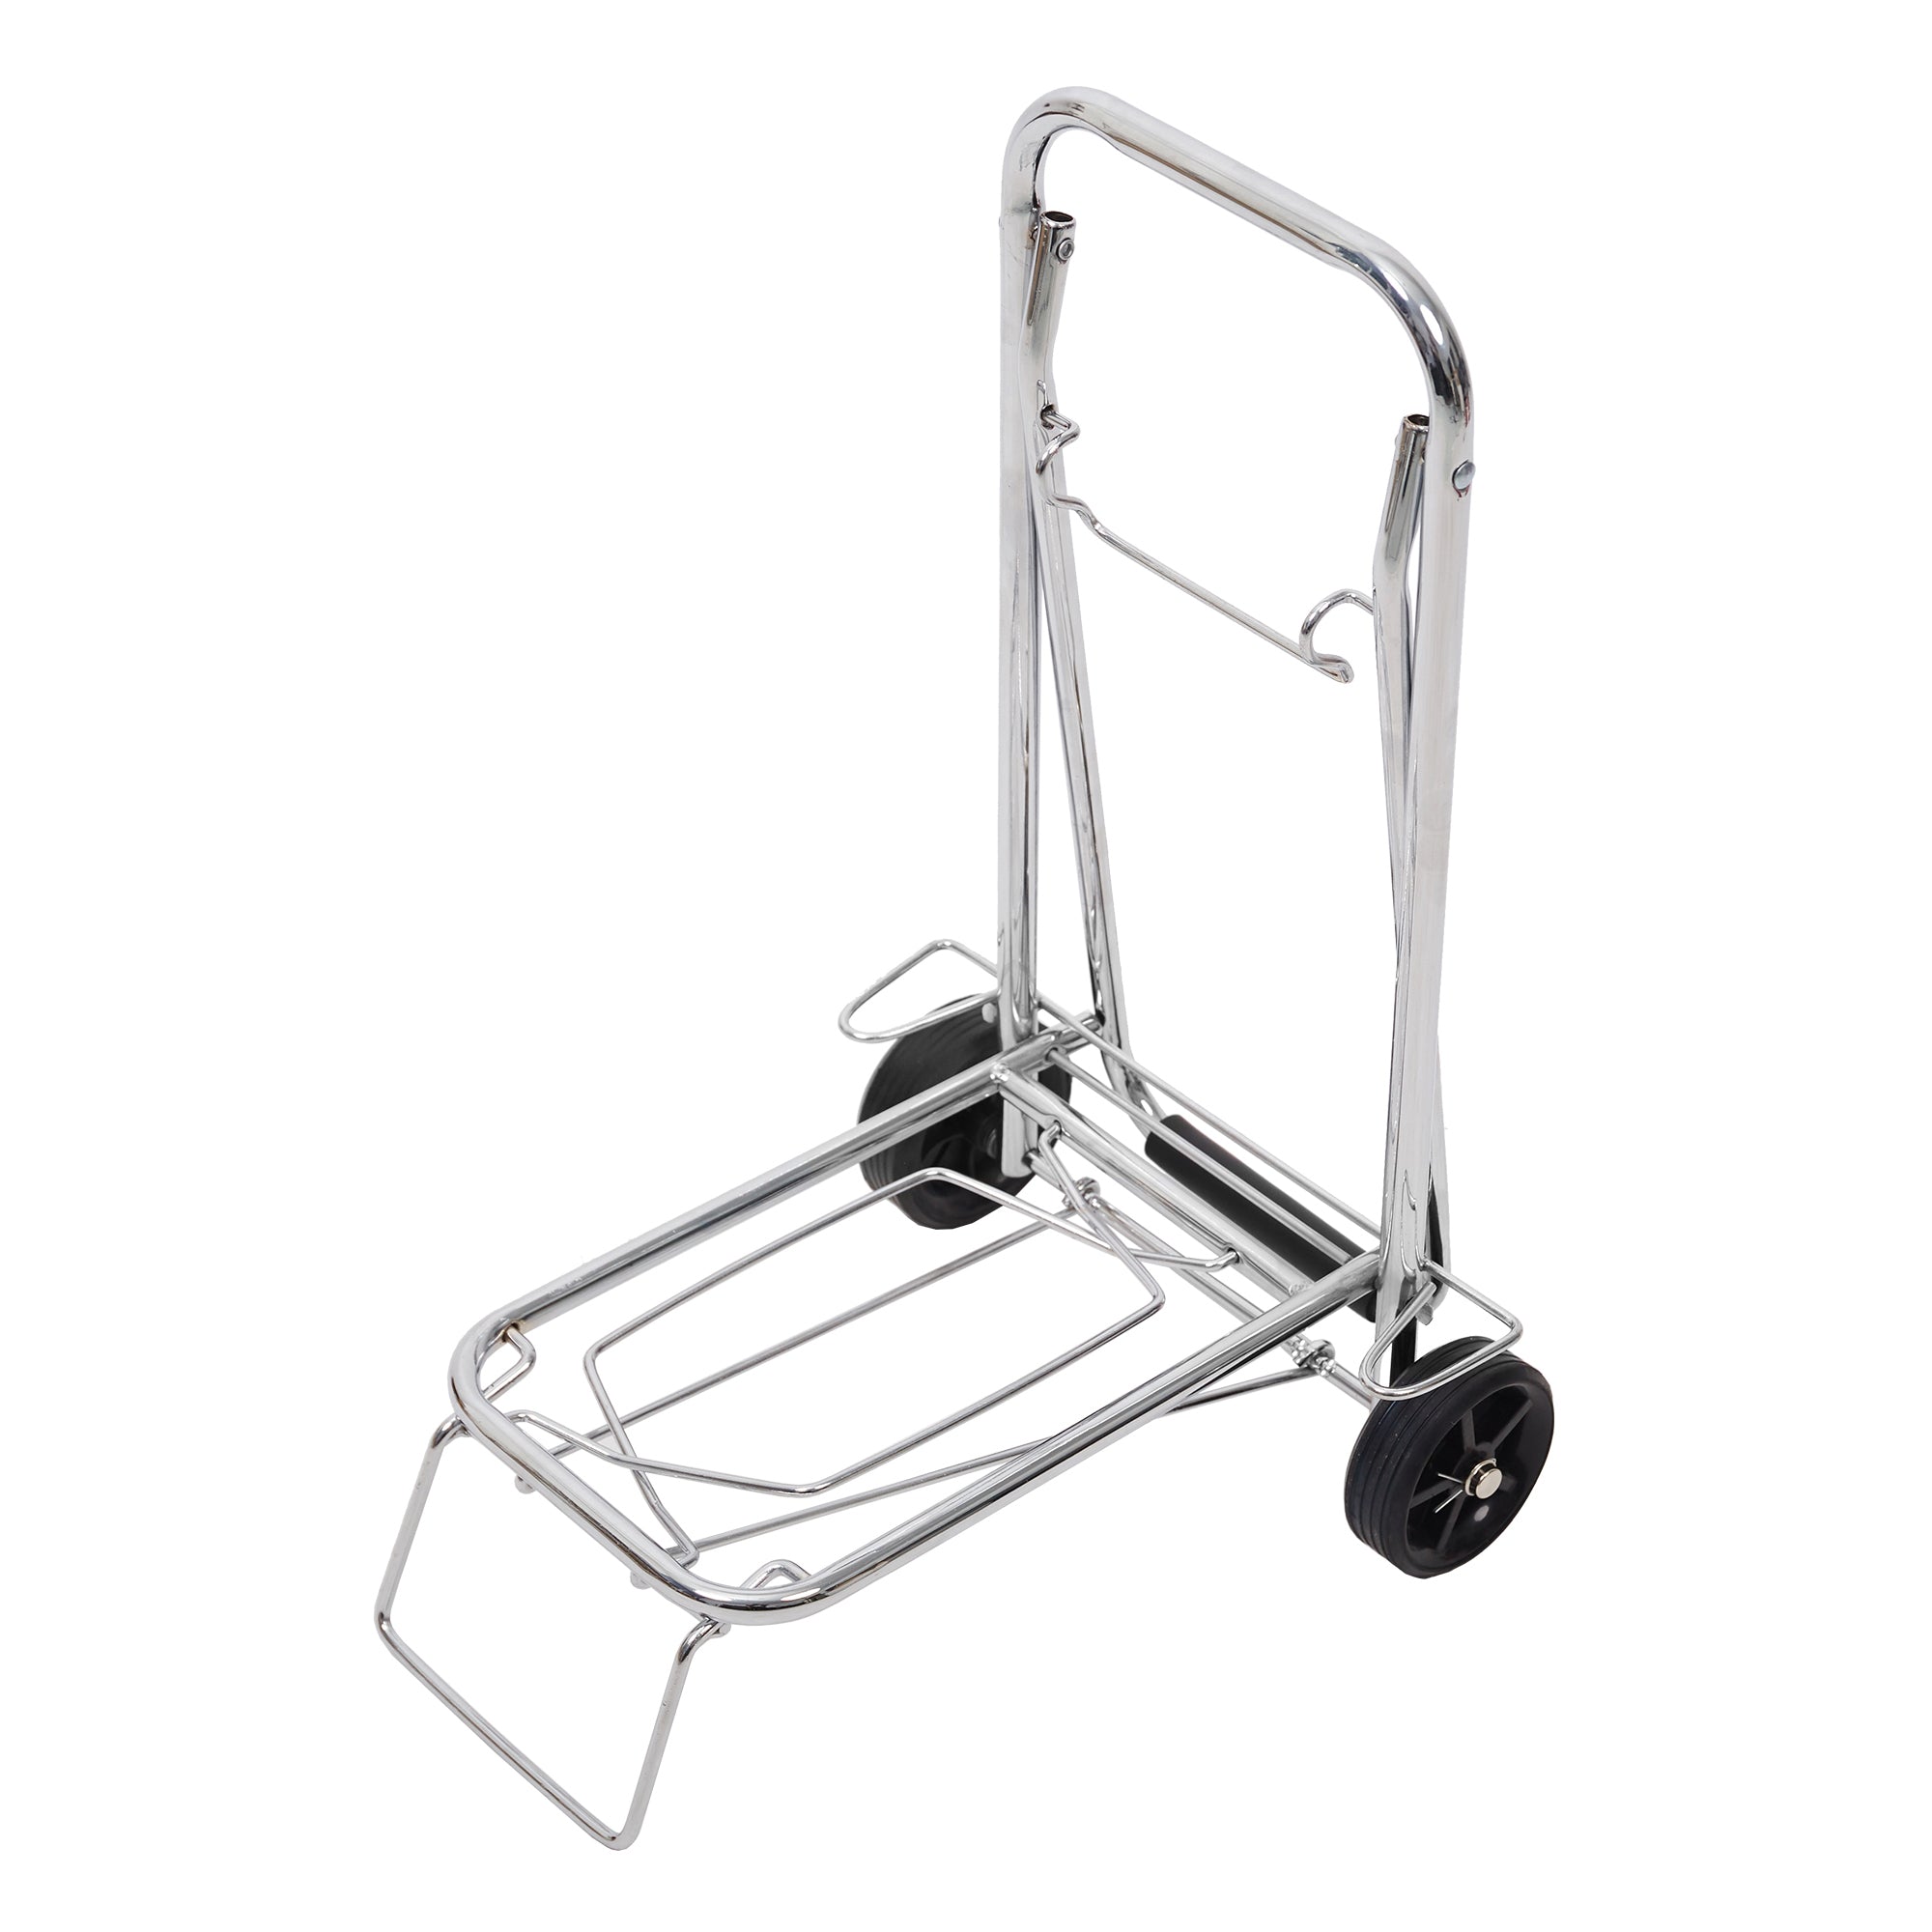 Bosonshop Aluminum Folding Hand Truck Portable Fold Up Dolly with Wheels for Indoor Outdoor Travel Shopping Office, 55lbs (Sliver)